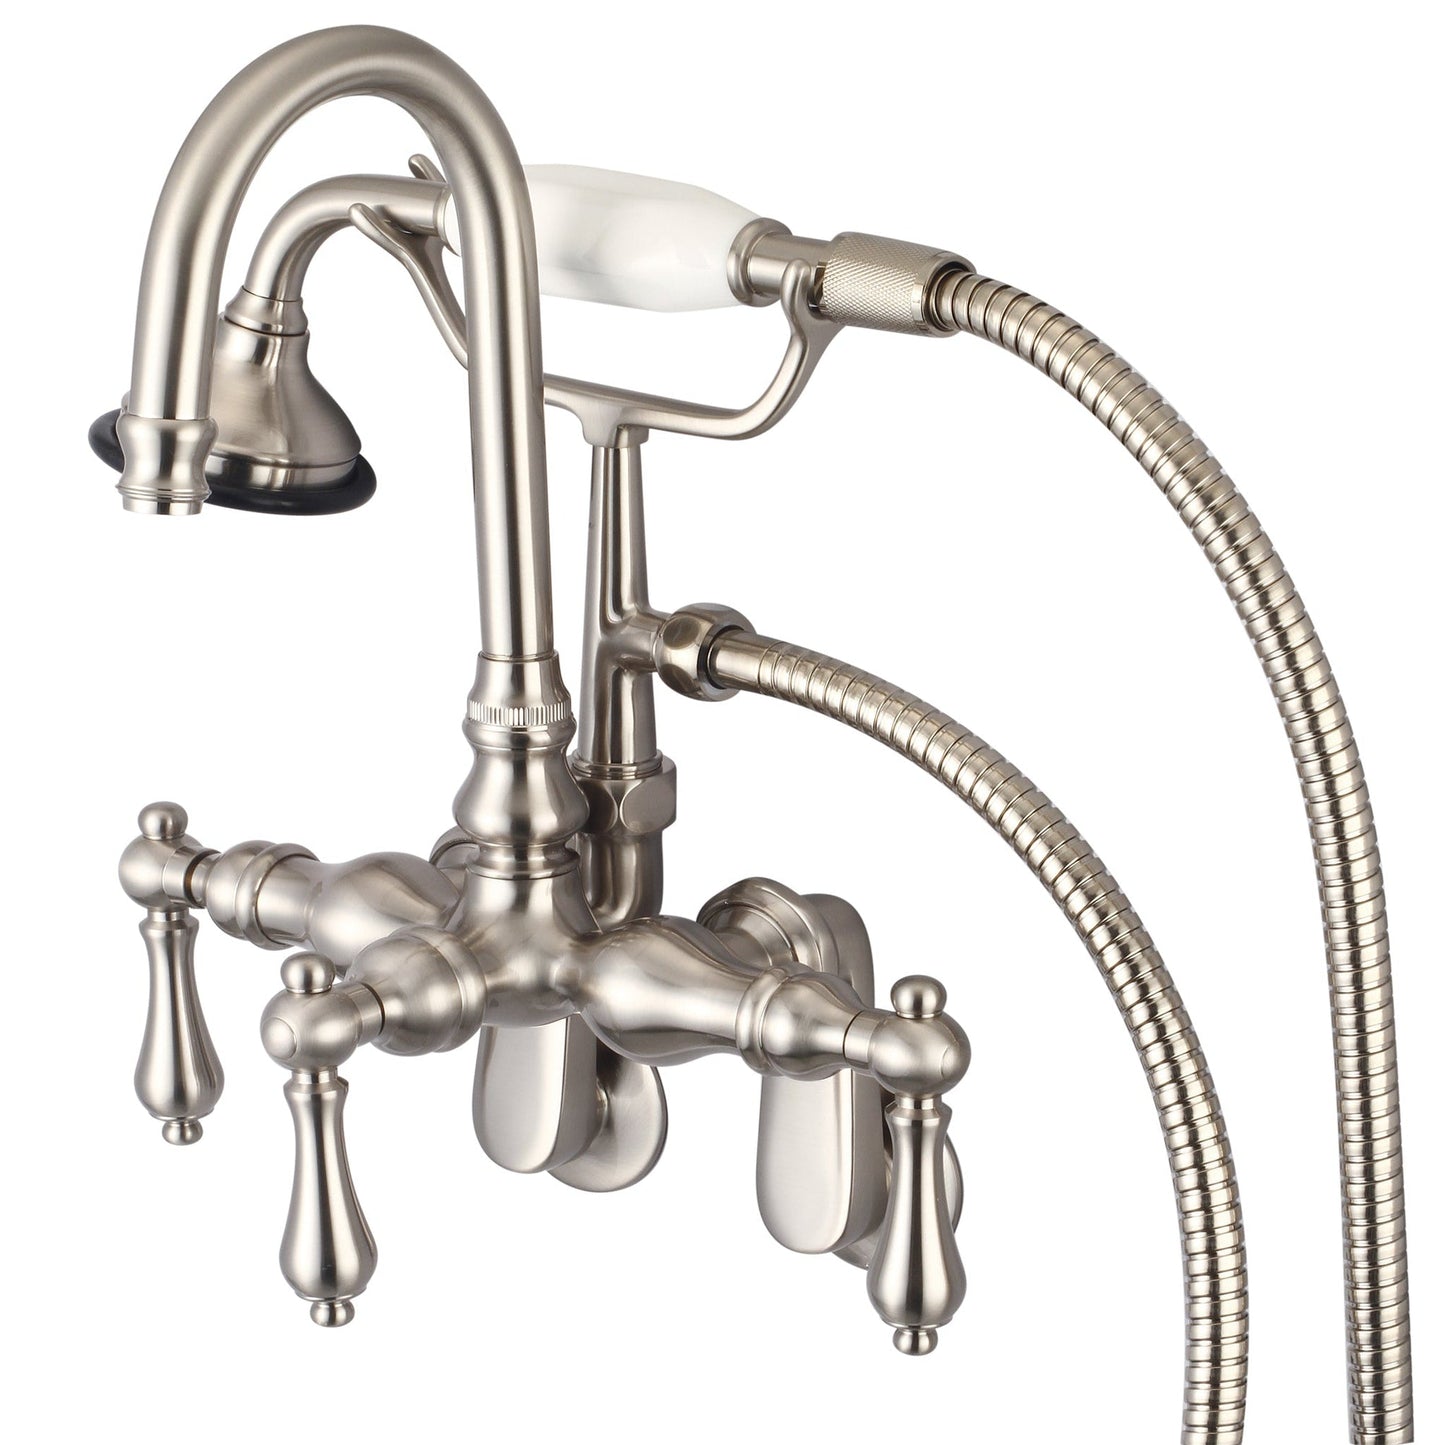 Water Creation Vintage Classic Adjustable Spread Wall Mount Tub F6-0011 9.25" Grey Solid Brass Faucet With Gooseneck Spout, Swivel Wall Connector And Handheld Shower And Metal Lever Handles Without Labels